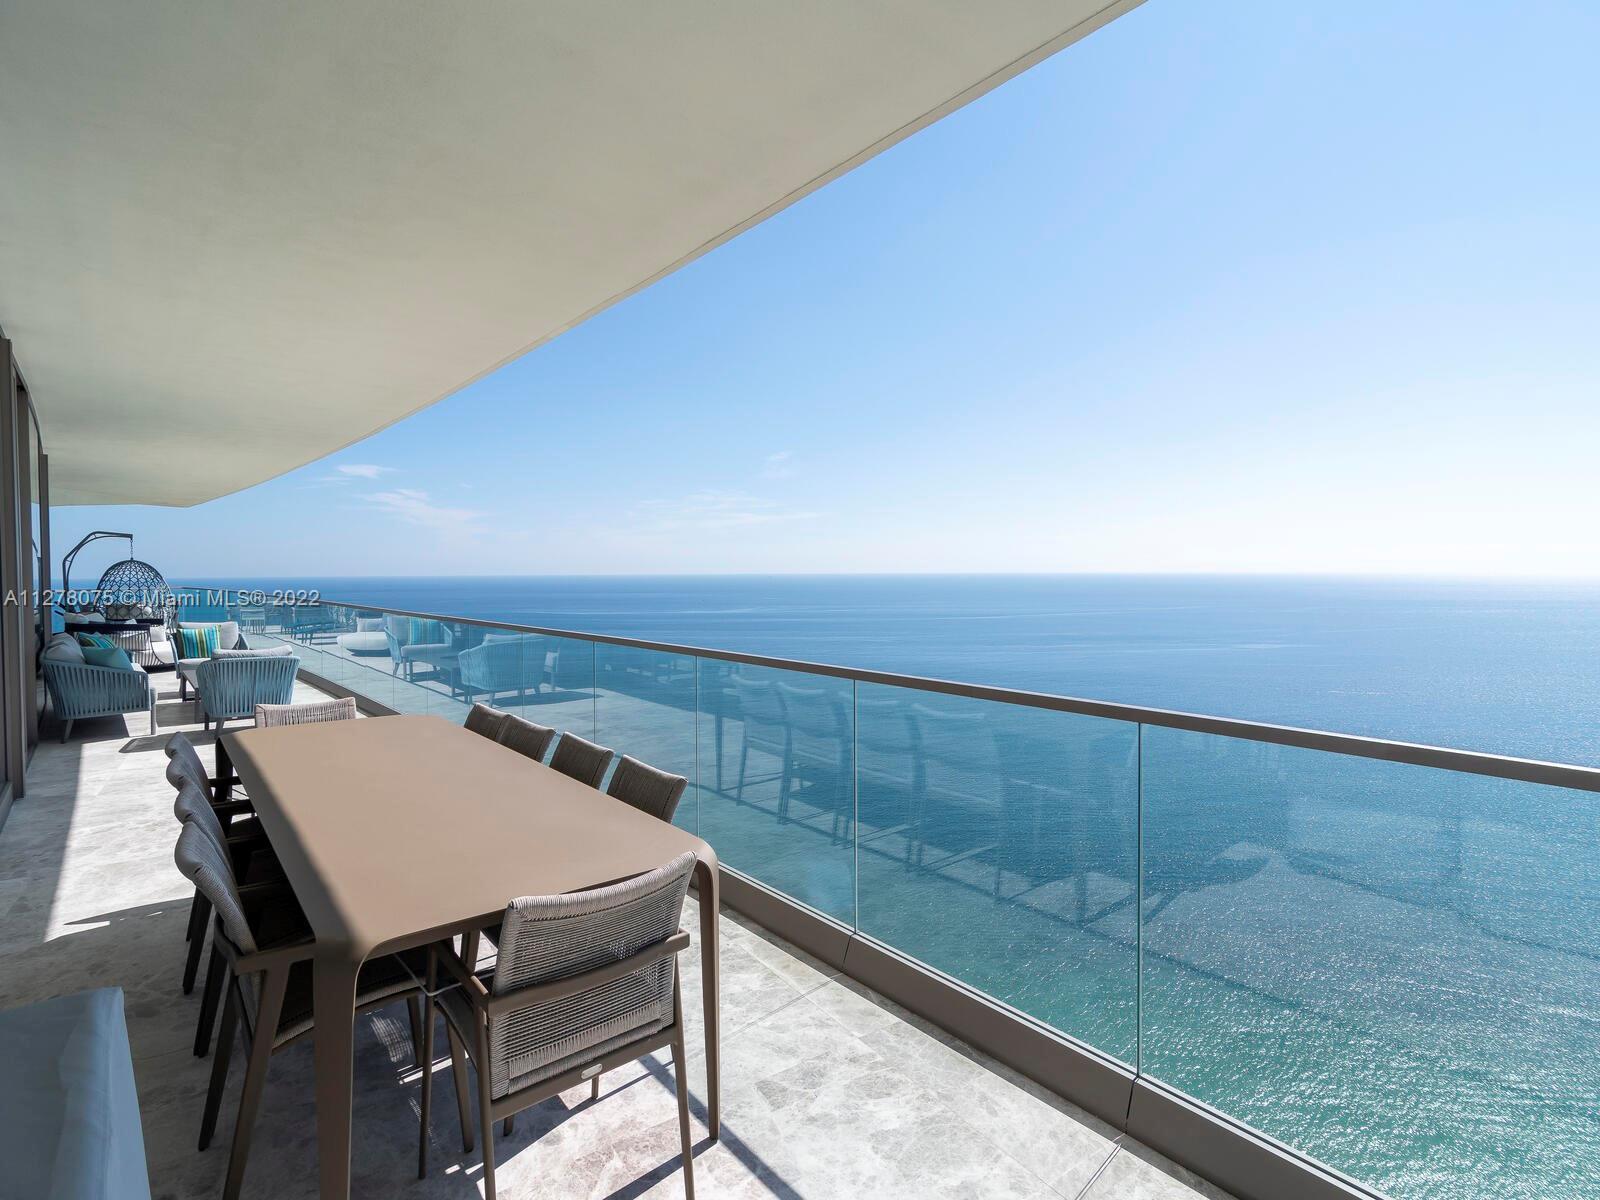 Spectacular corner unit with breathtaking direct ocean views and over 1600sqf of balcony. Located in